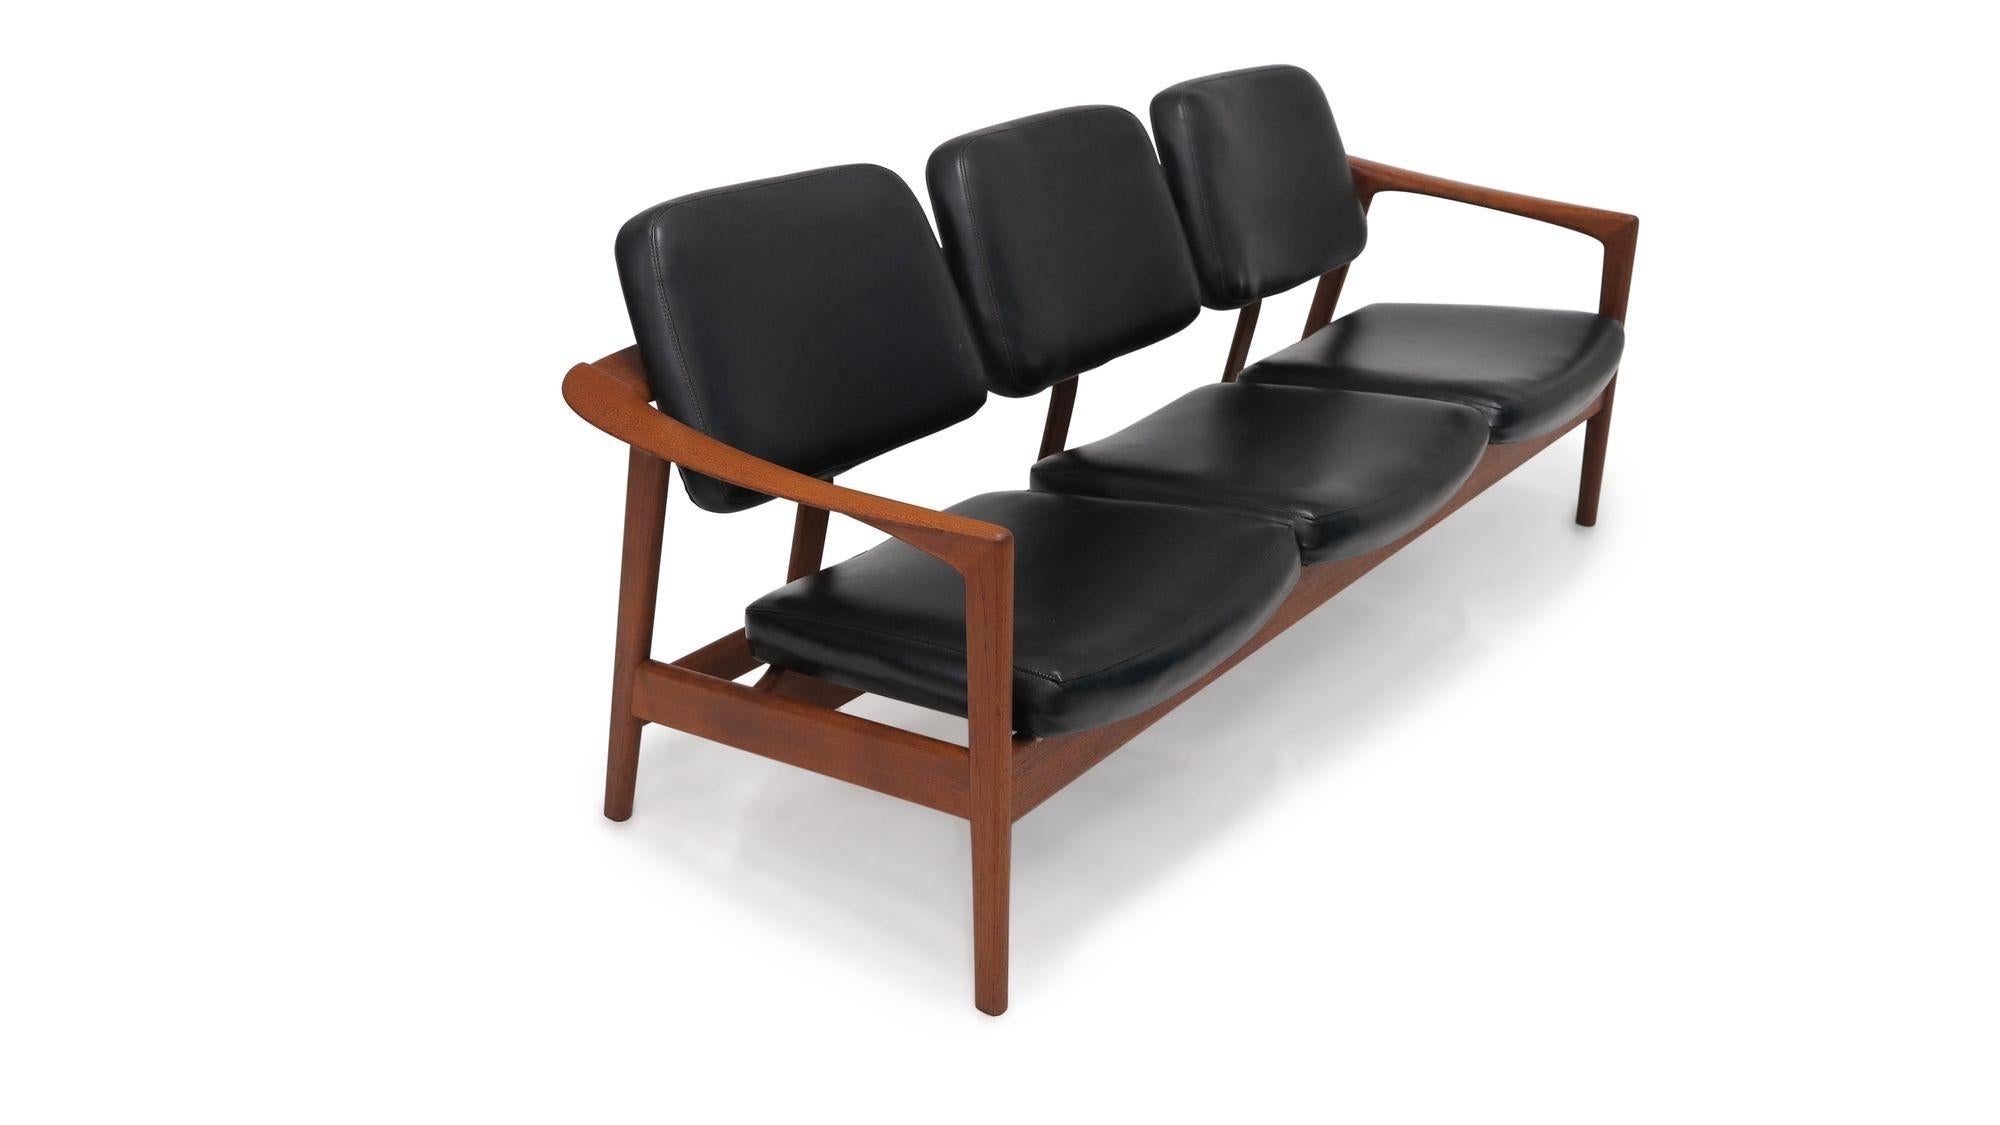 Sofa designed by Folke Ohlsson, 1965, Sweden. The sofa is crafted of sculpted teak frame with original black vinyl upholstered seats and backs. Rare model. Perfect for residential or commercial environment
Measurements W 73'' x D 27.50'' x H